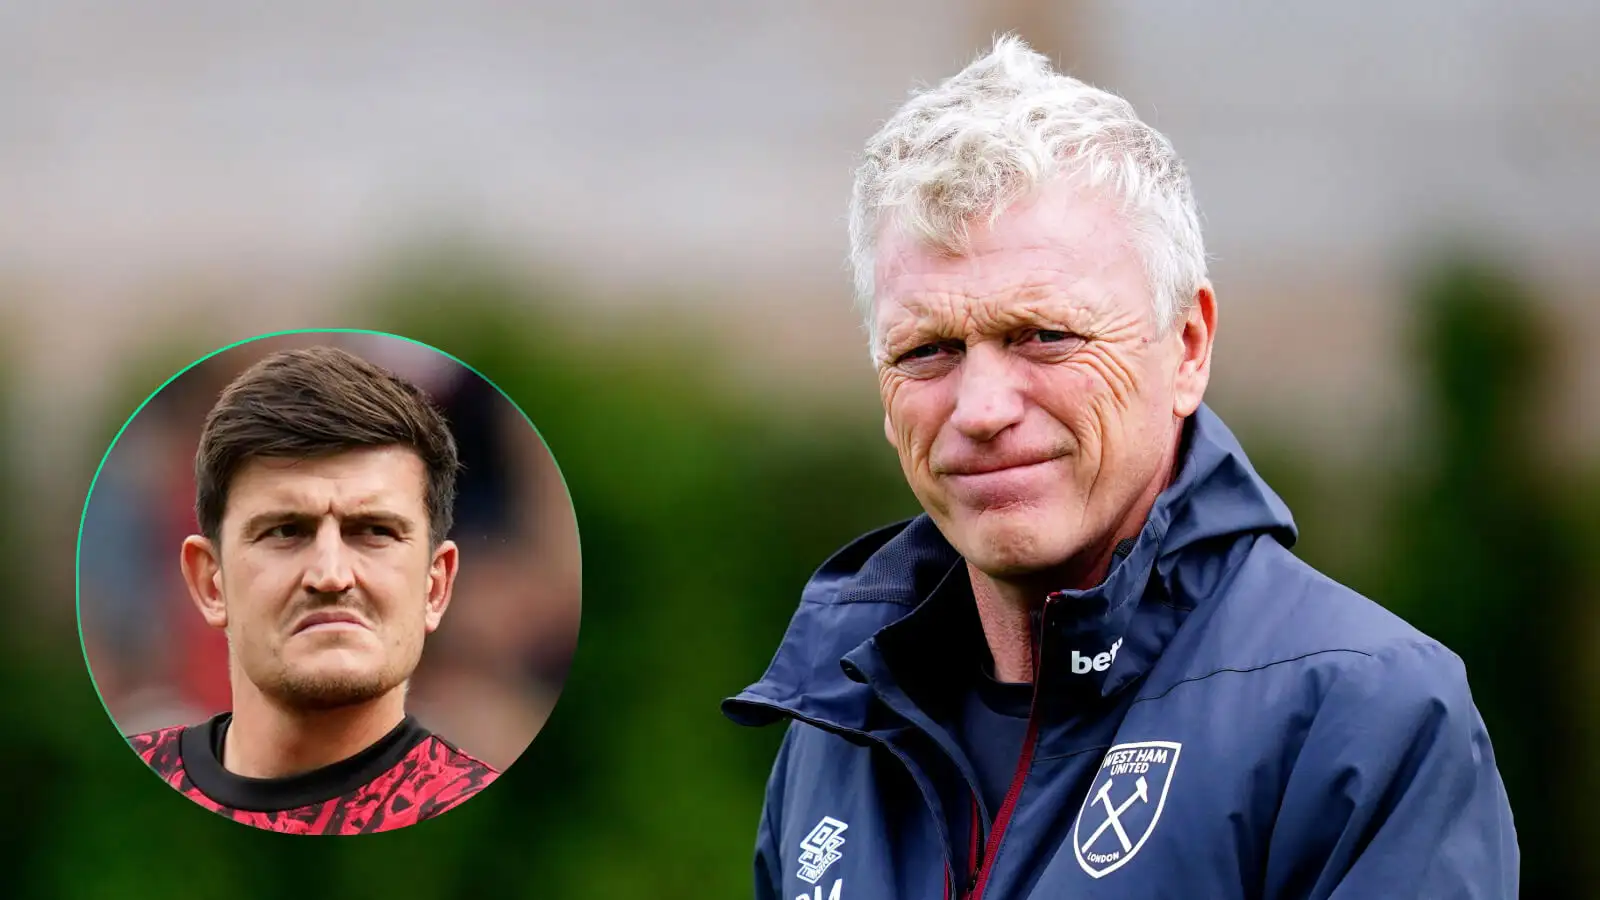 West Ham manager David Moyes and Man Utd defender Harry Maguire